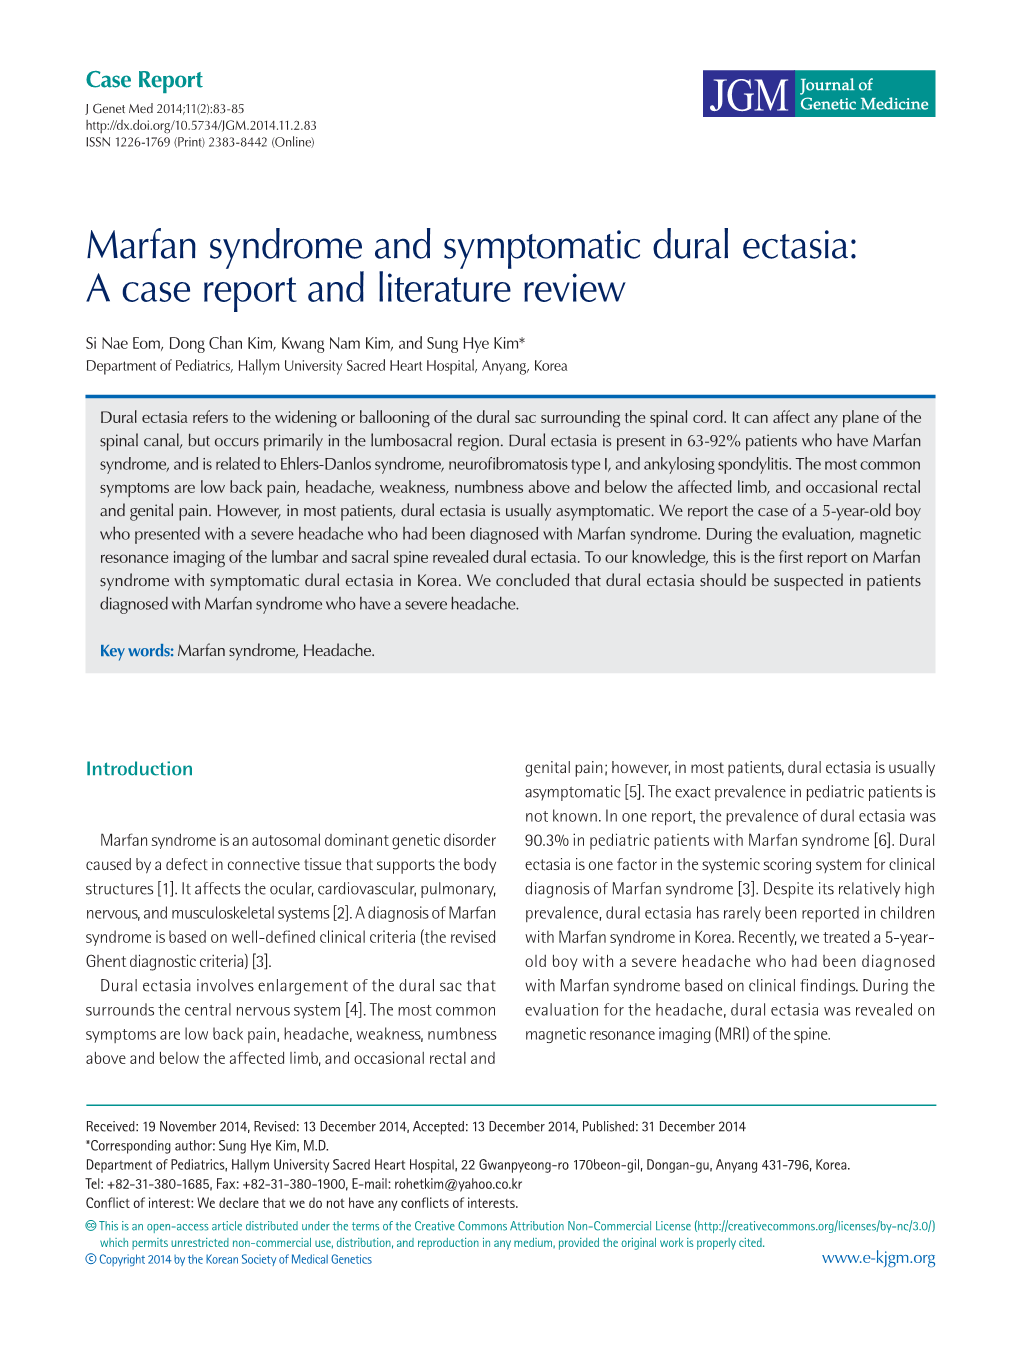 Marfan Syndrome and Symptomatic Dural Ectasia: a Case Report and Literature Review